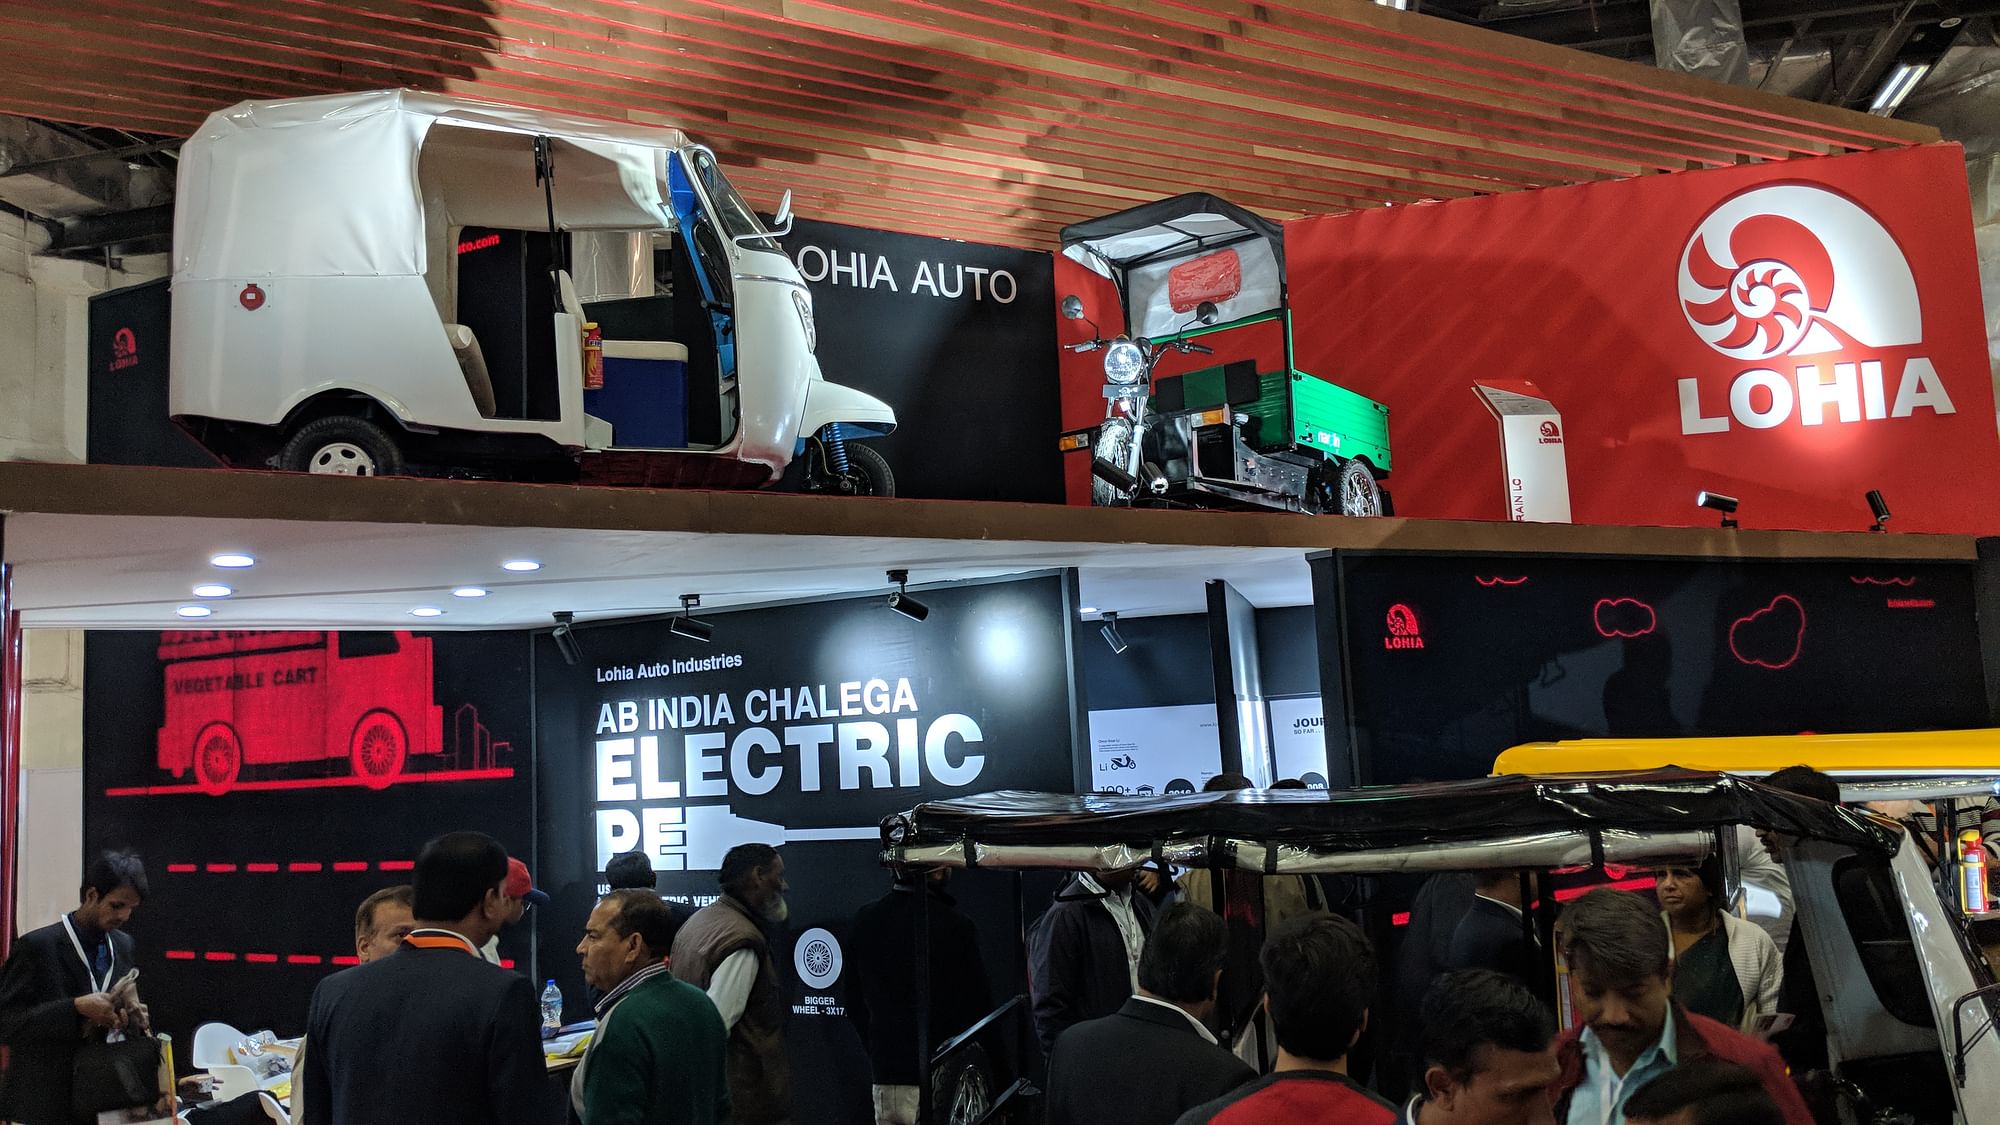 Electric Vehicle Expo 2017 Going Electric Still a Distant Dream